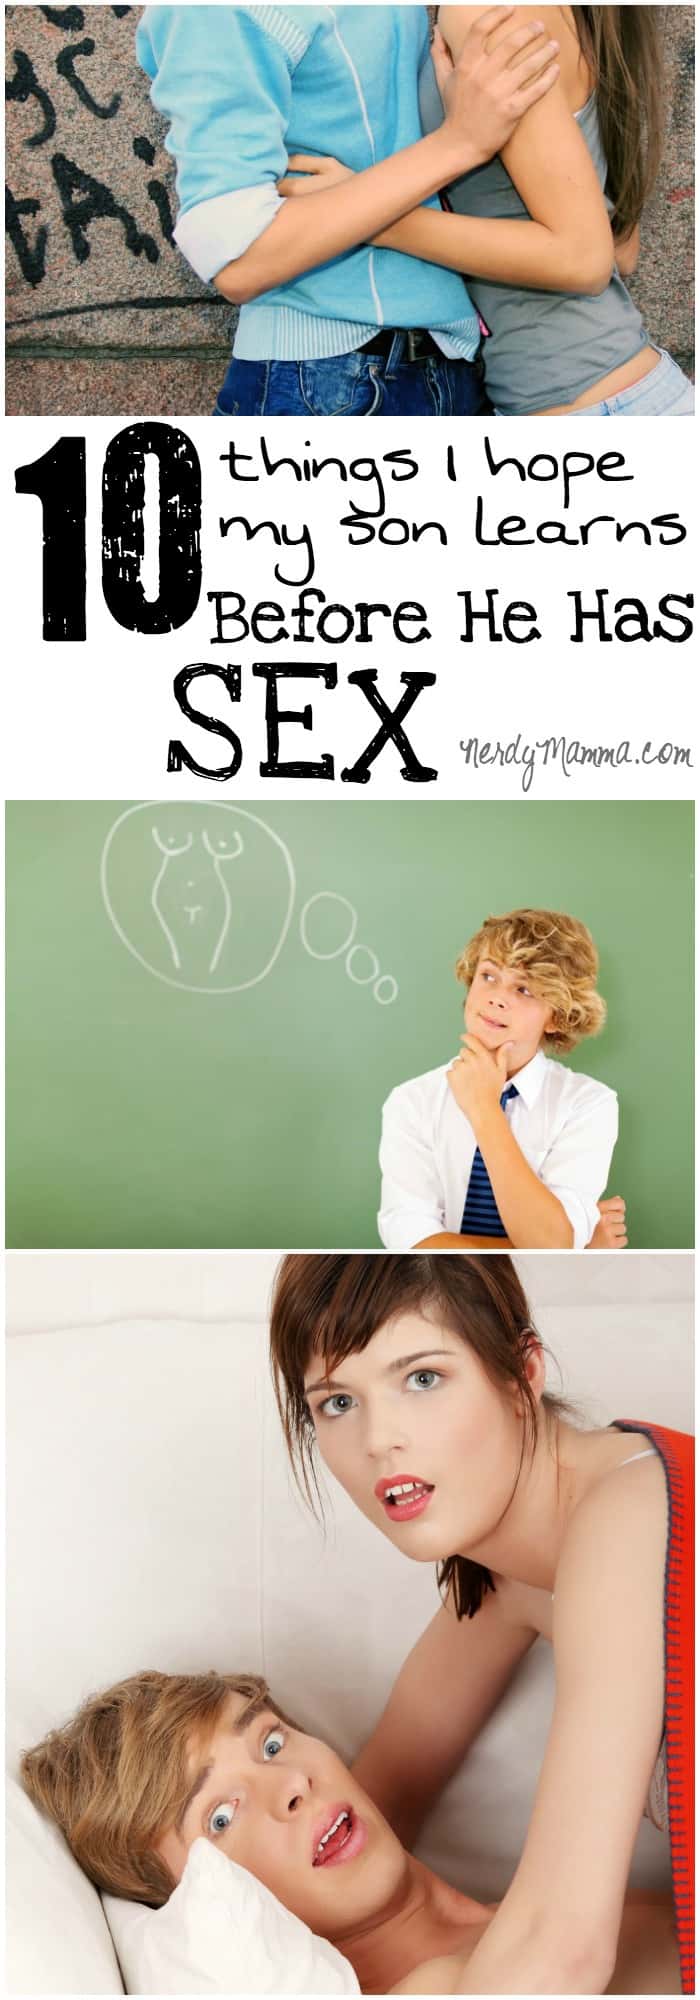 There are 10 Things I Hope My Son Learns Before He Has Sex. Actually, I kinda wish all boys learned this...would make the world a better place, I think. Heh.